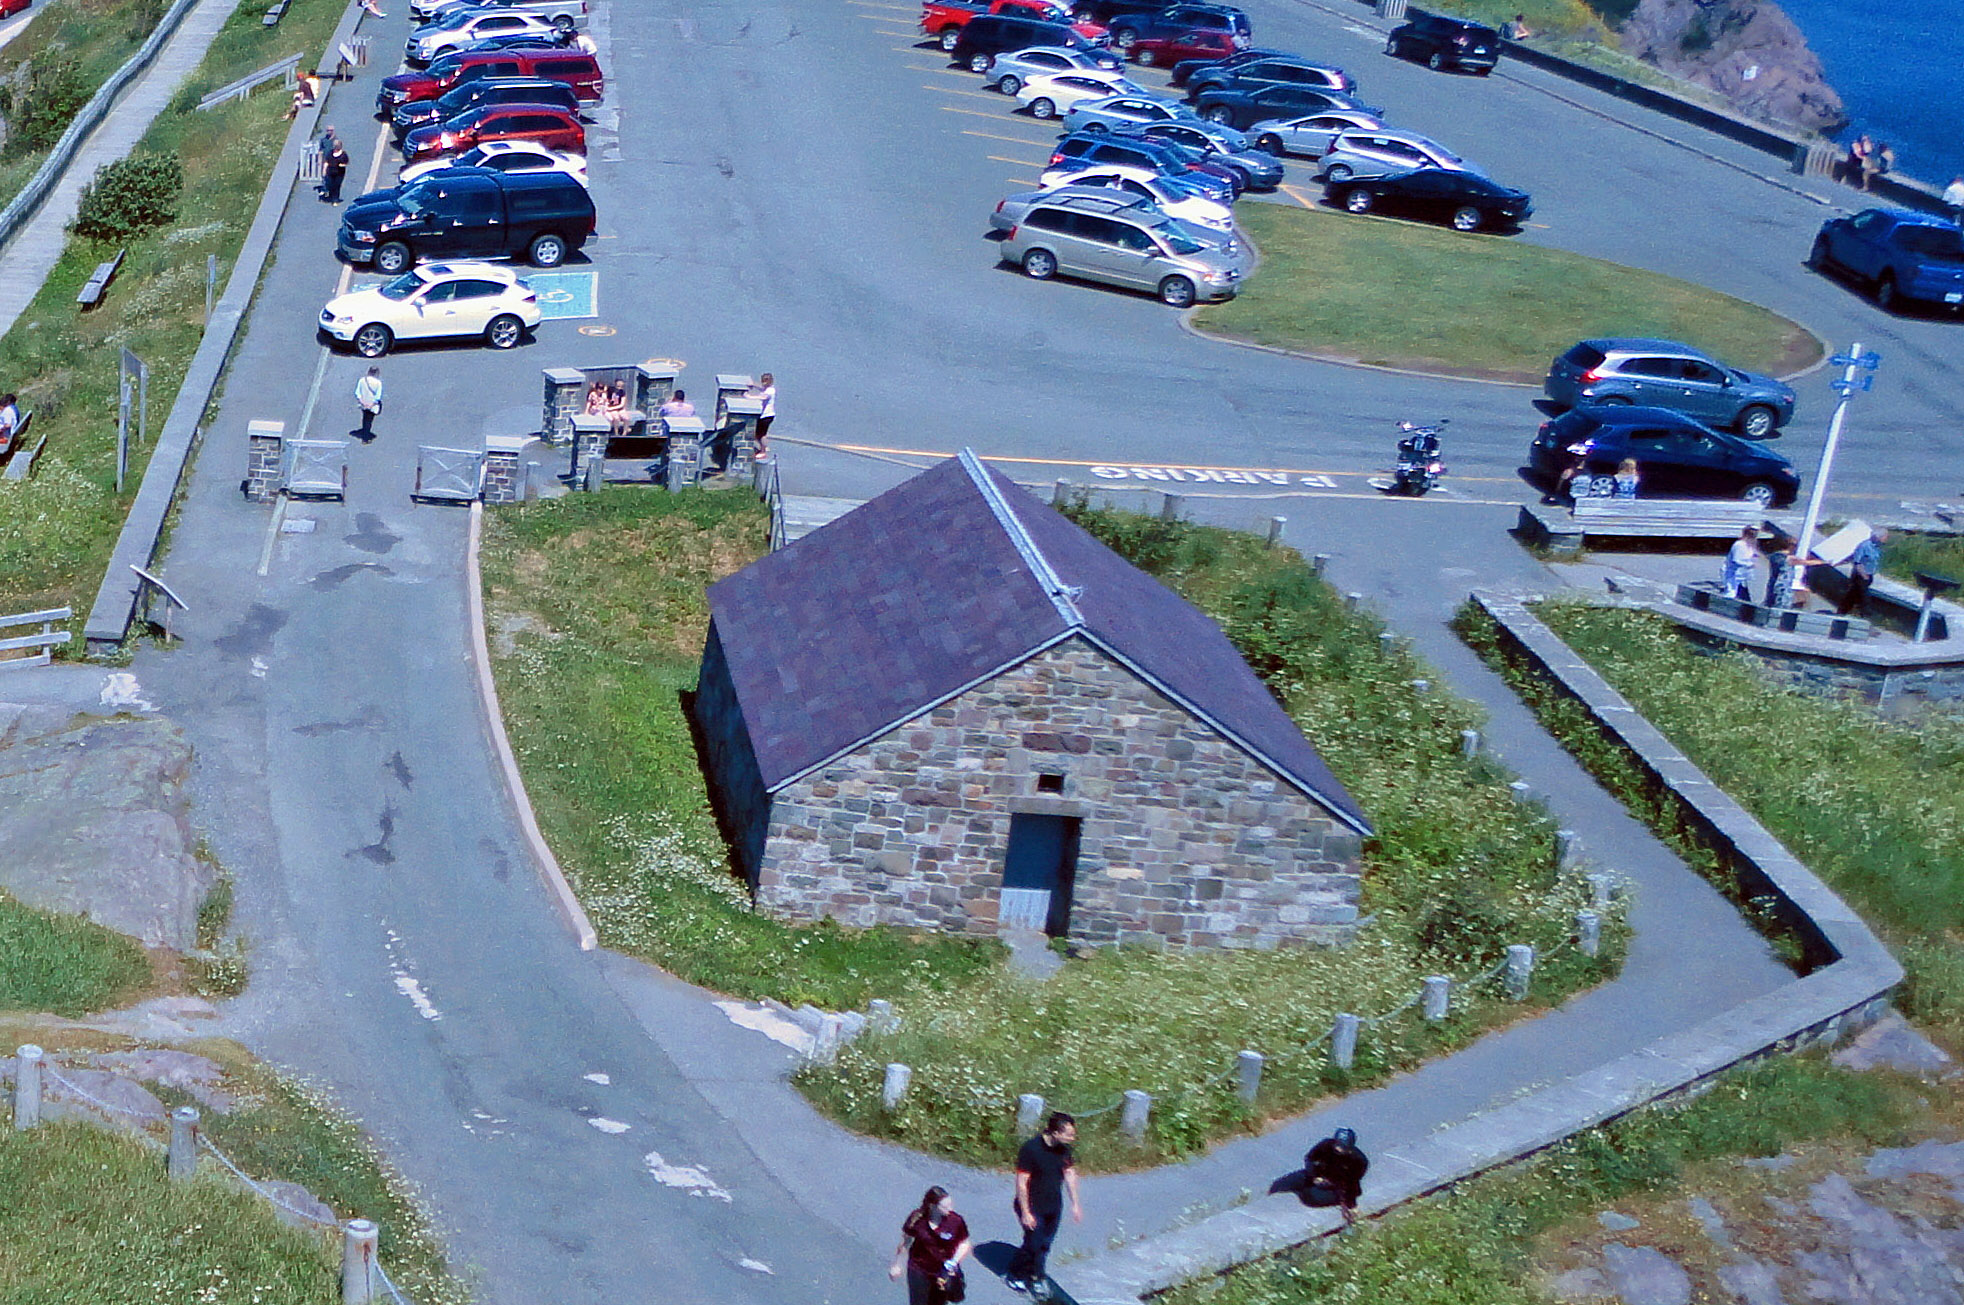 Summit of Signal Hill in 2014. Upper right was the location of one 8 inch rail gun.